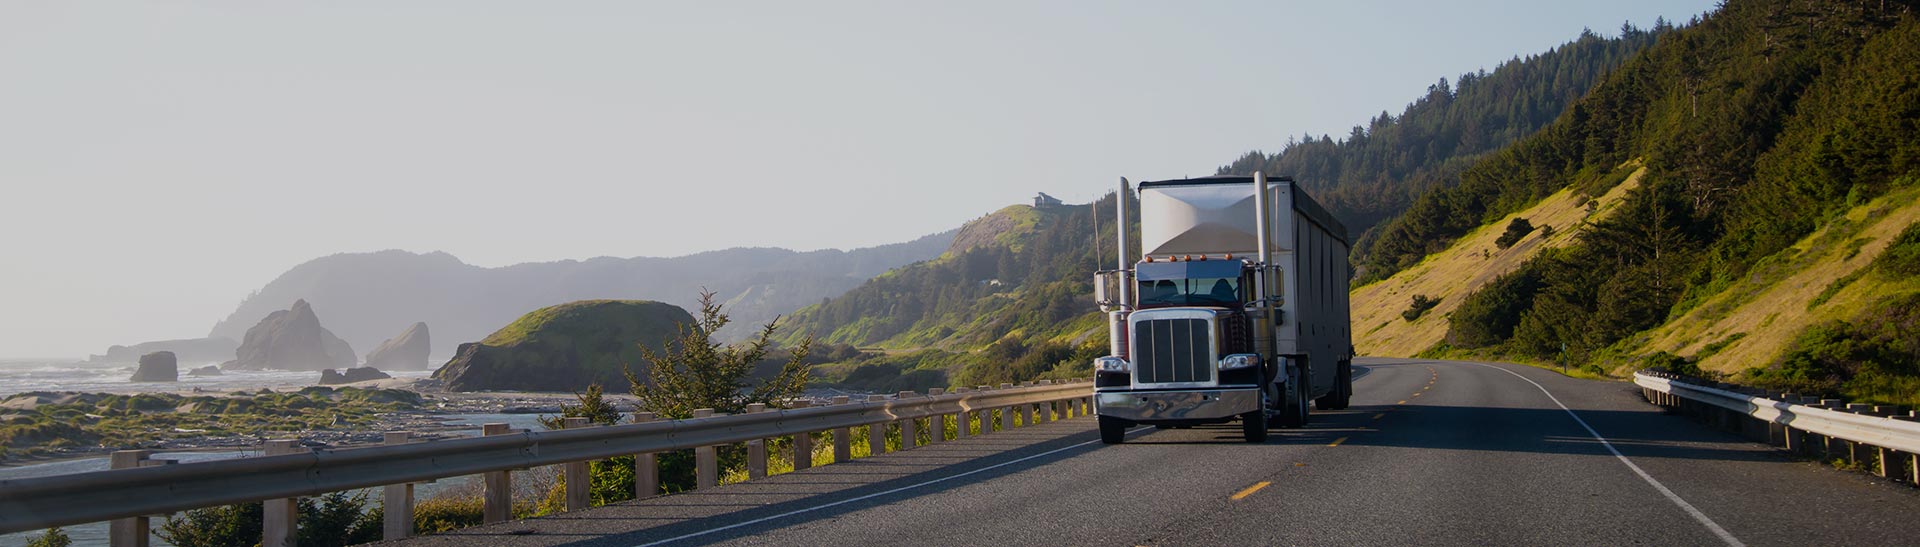 Wendover Trucking Company, Trucking Services and Long Haul Trucking